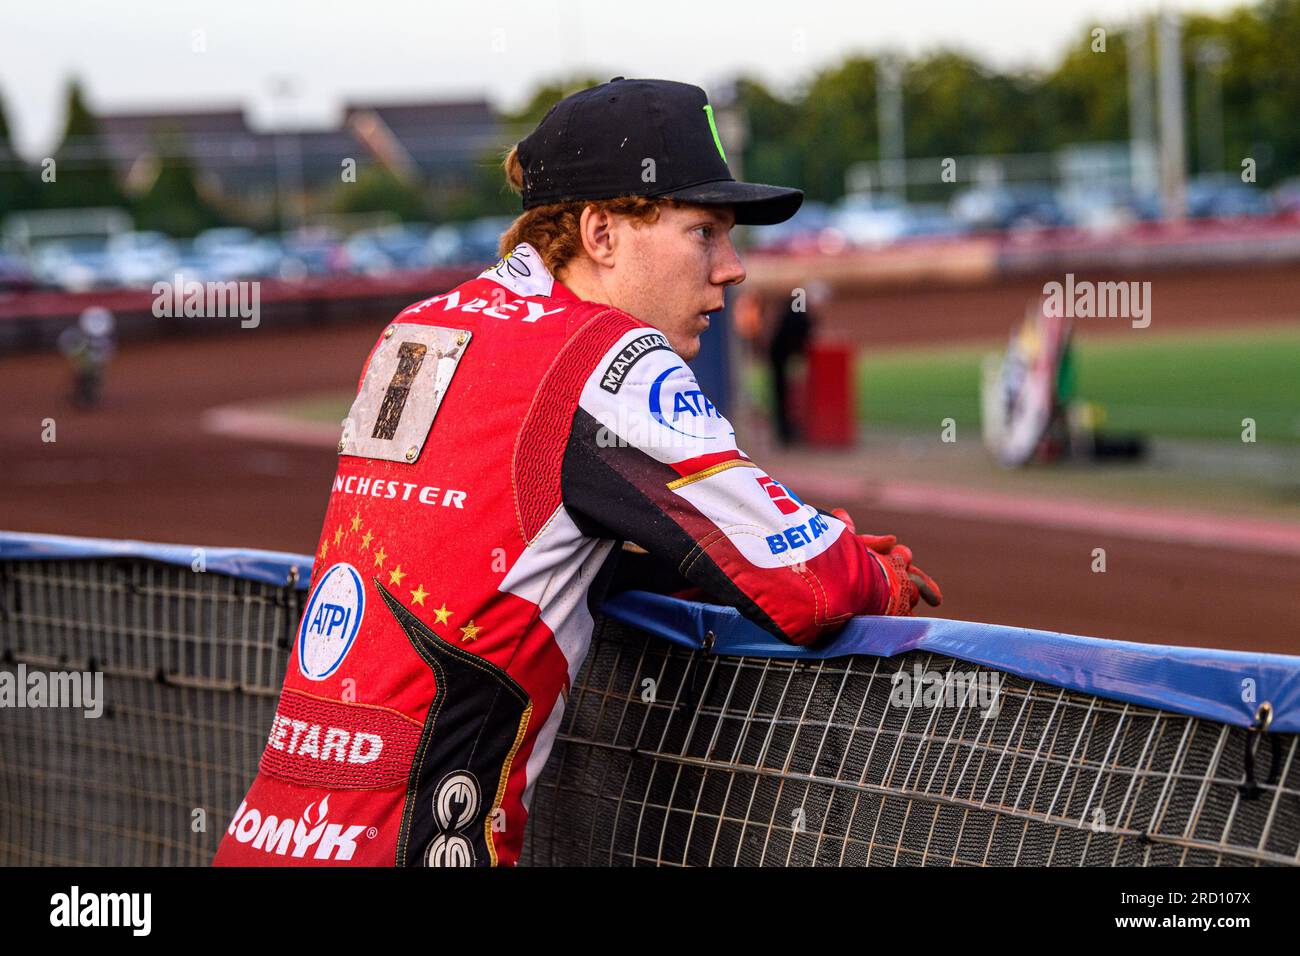 National Speedway Stadium, Manchester on Monday 17th July 2023. Dan Bewley watches the track prep during the Sports Insure Premiership match between Belle Vue Aces and Ipswich Witches at the National Speedway Stadium, Manchester on Monday 17th July 2023. (Photo: Ian Charles | MI News) Credit: MI News & Sport /Alamy Live News Stock Photo